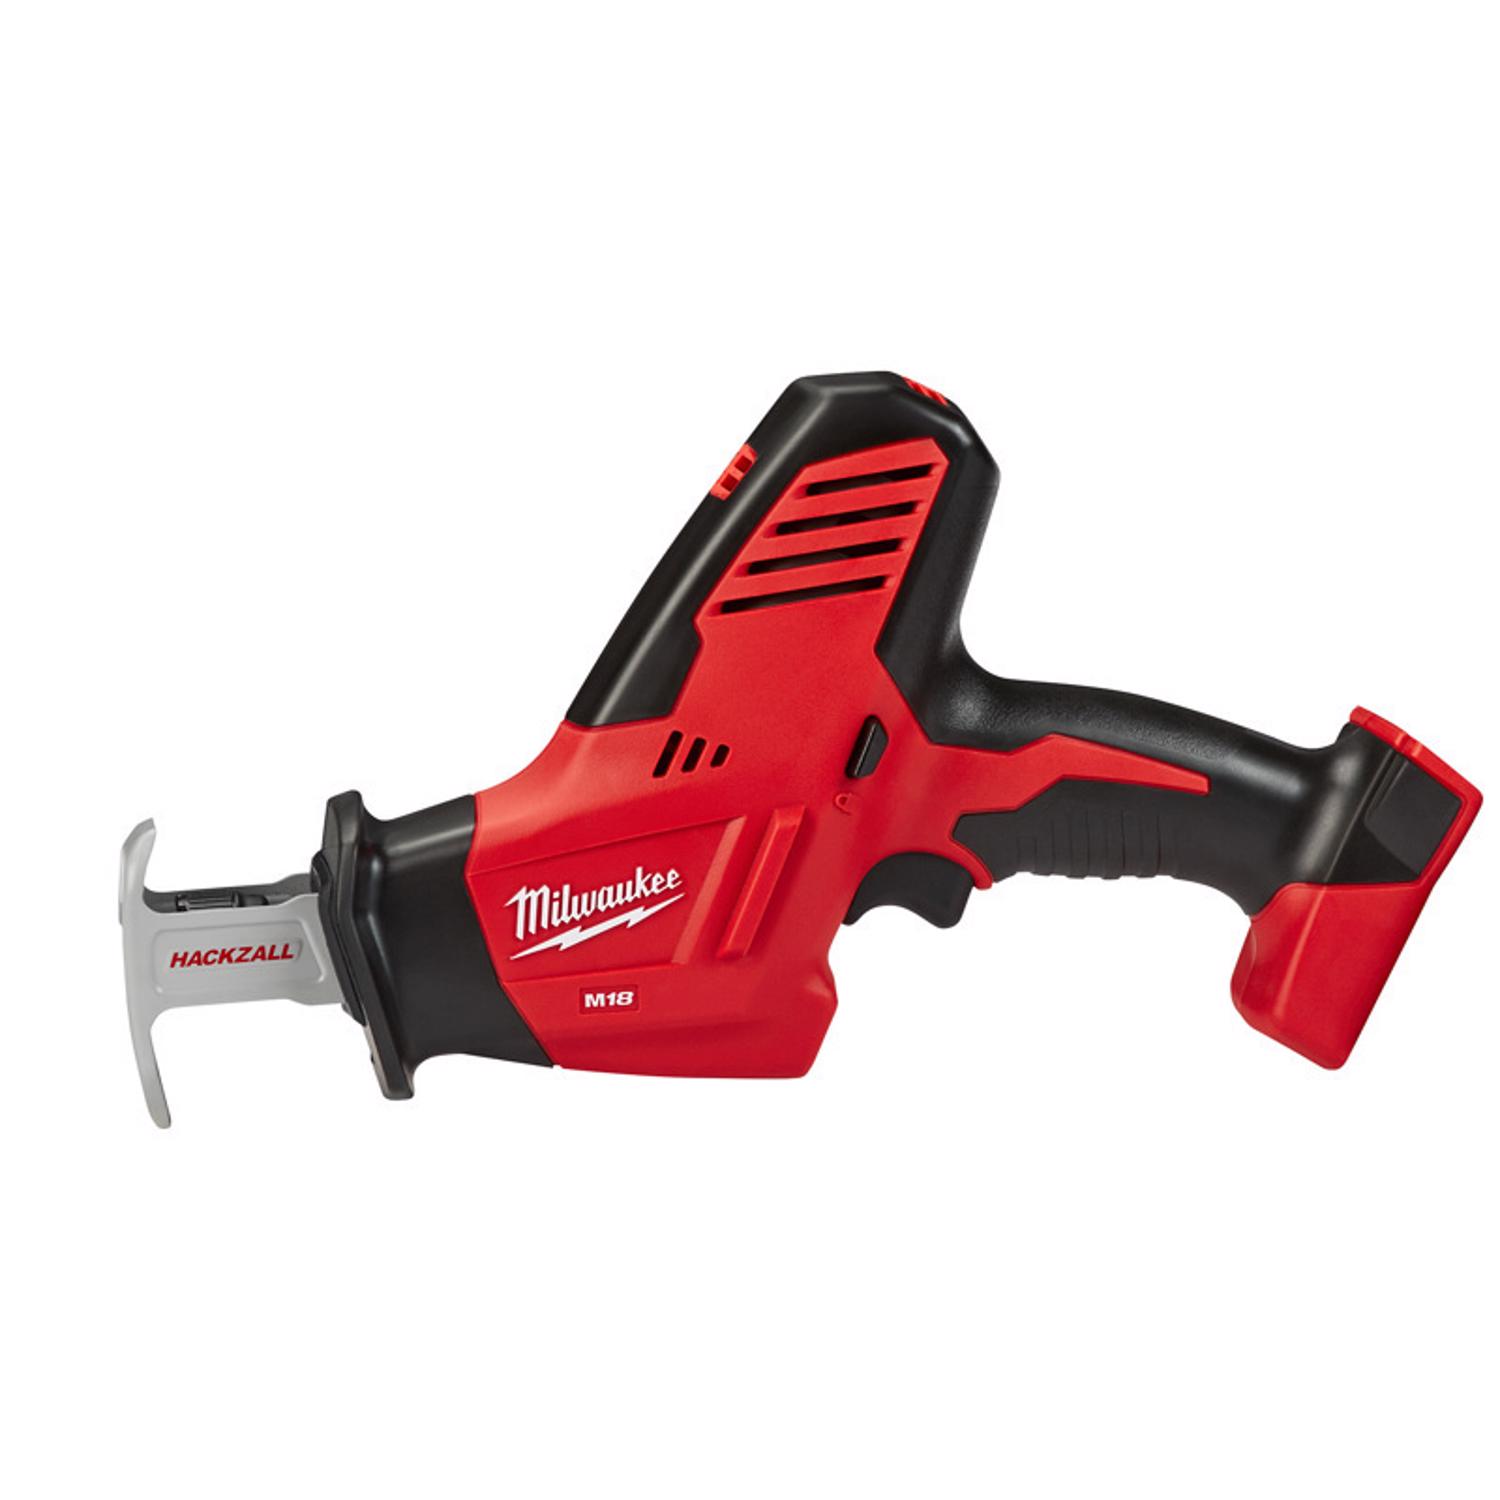 Milwaukee 2625-20 M18 HACKZALL 18 V Cordless Brushed One-Handed Reciprocating Saw Tool Only $79 at several sites